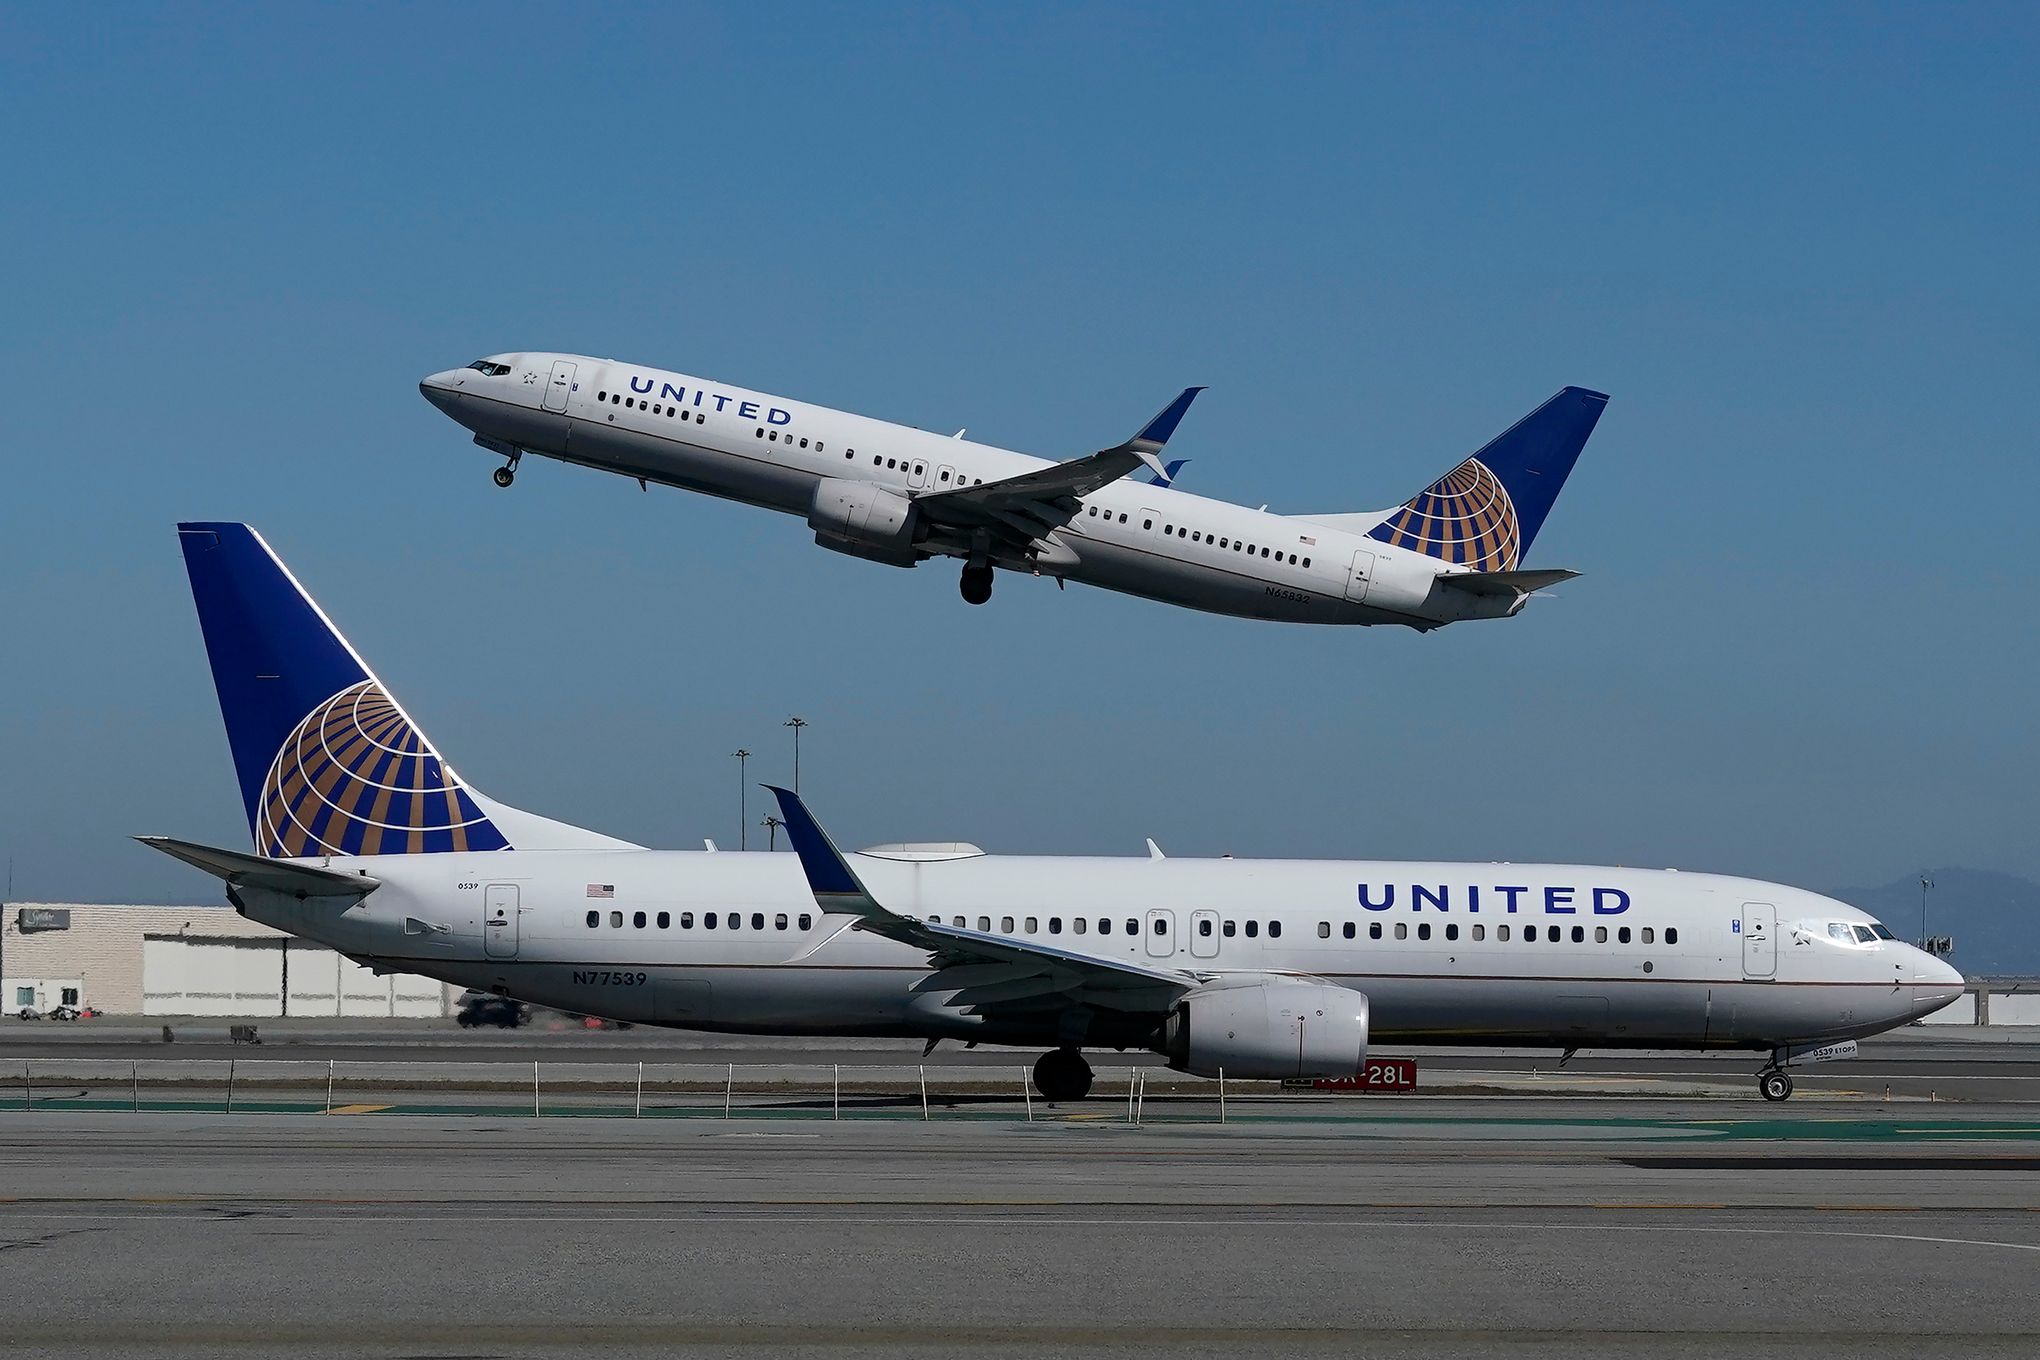 The New United Fleet Experience